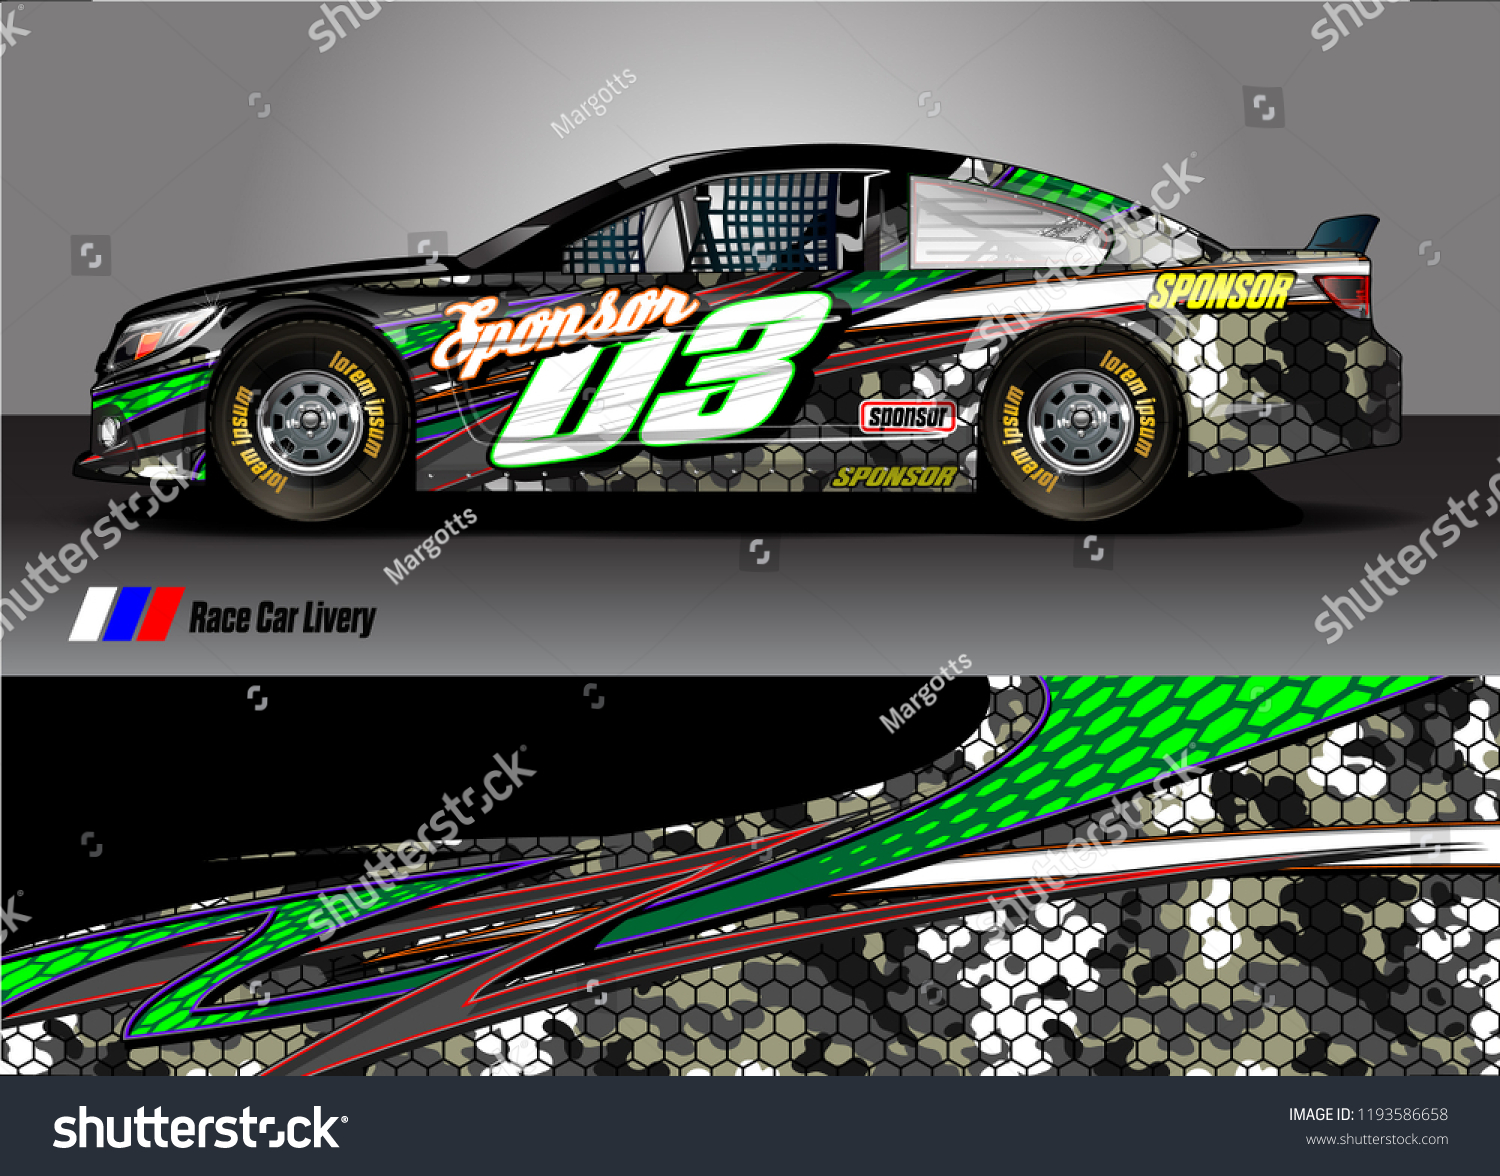 Race Car Livery Graphic Vector Abstract Stock Vector (Royalty Free ...